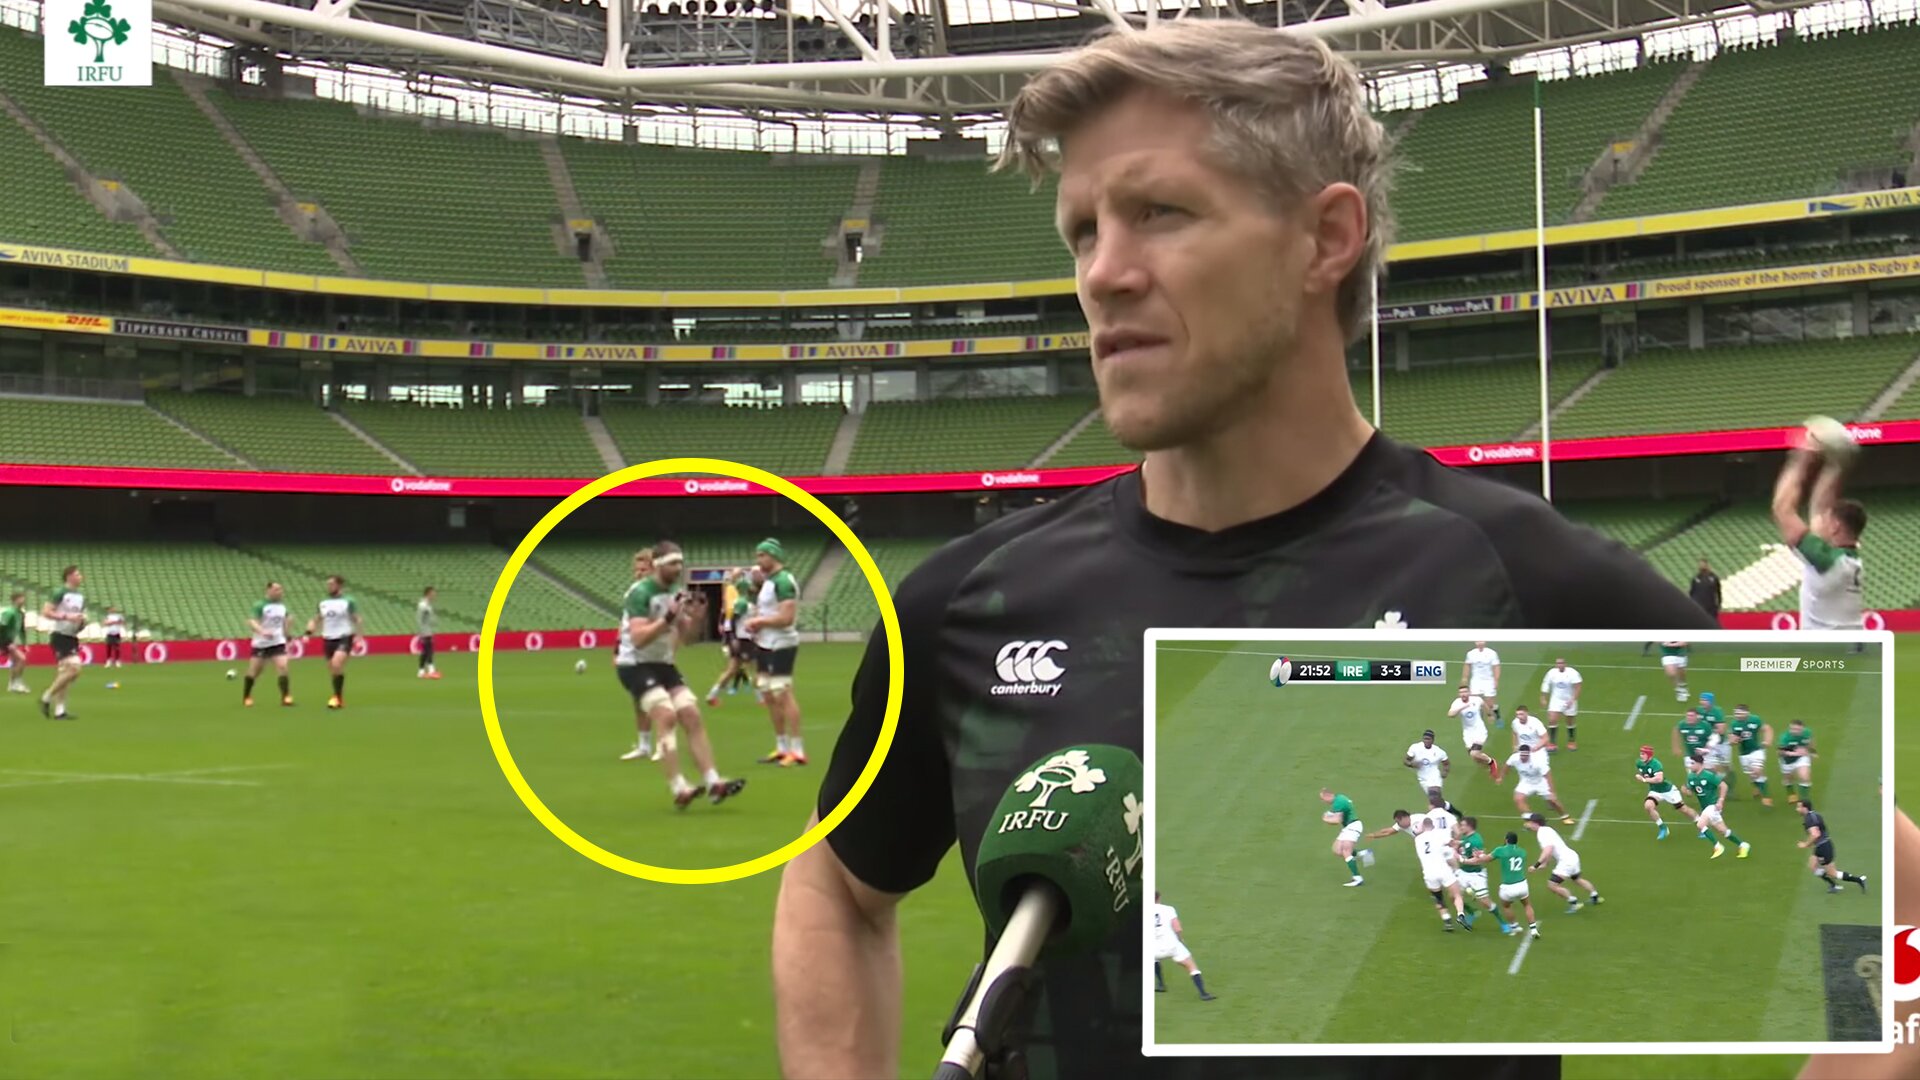 Incredible footage shows Ireland practicing the Keith Earls try before game